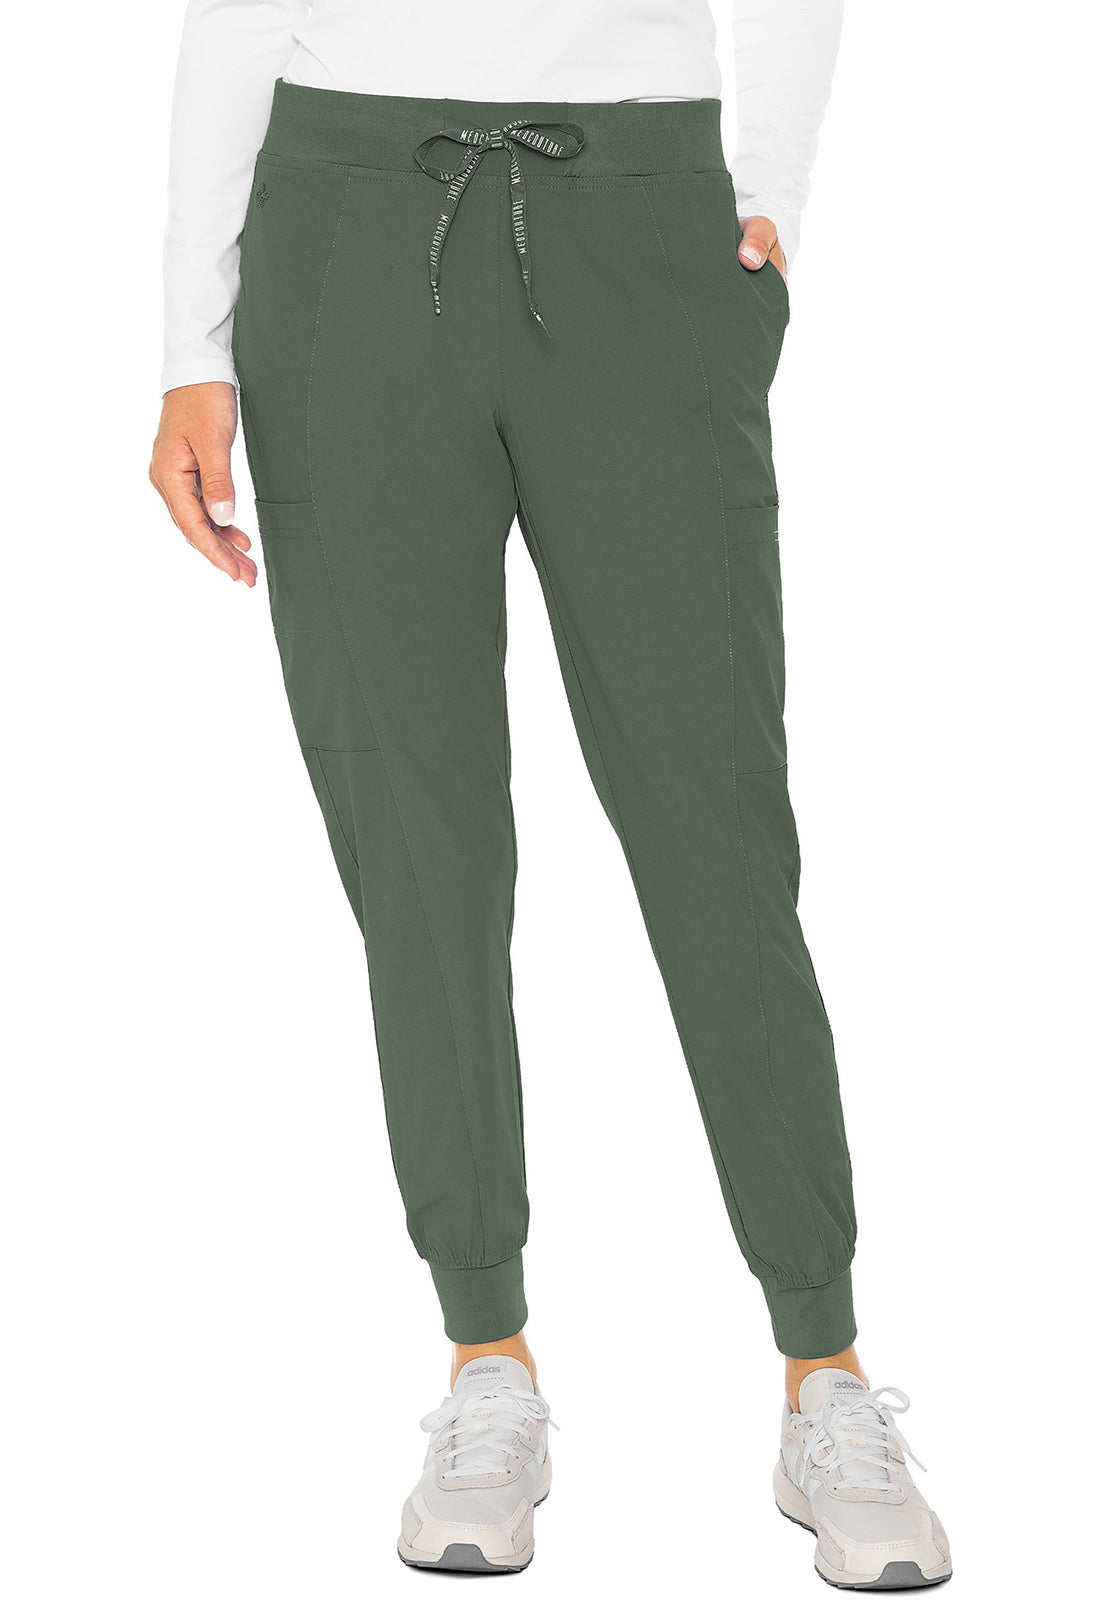 Med Couture Peaches Jogger Pants 